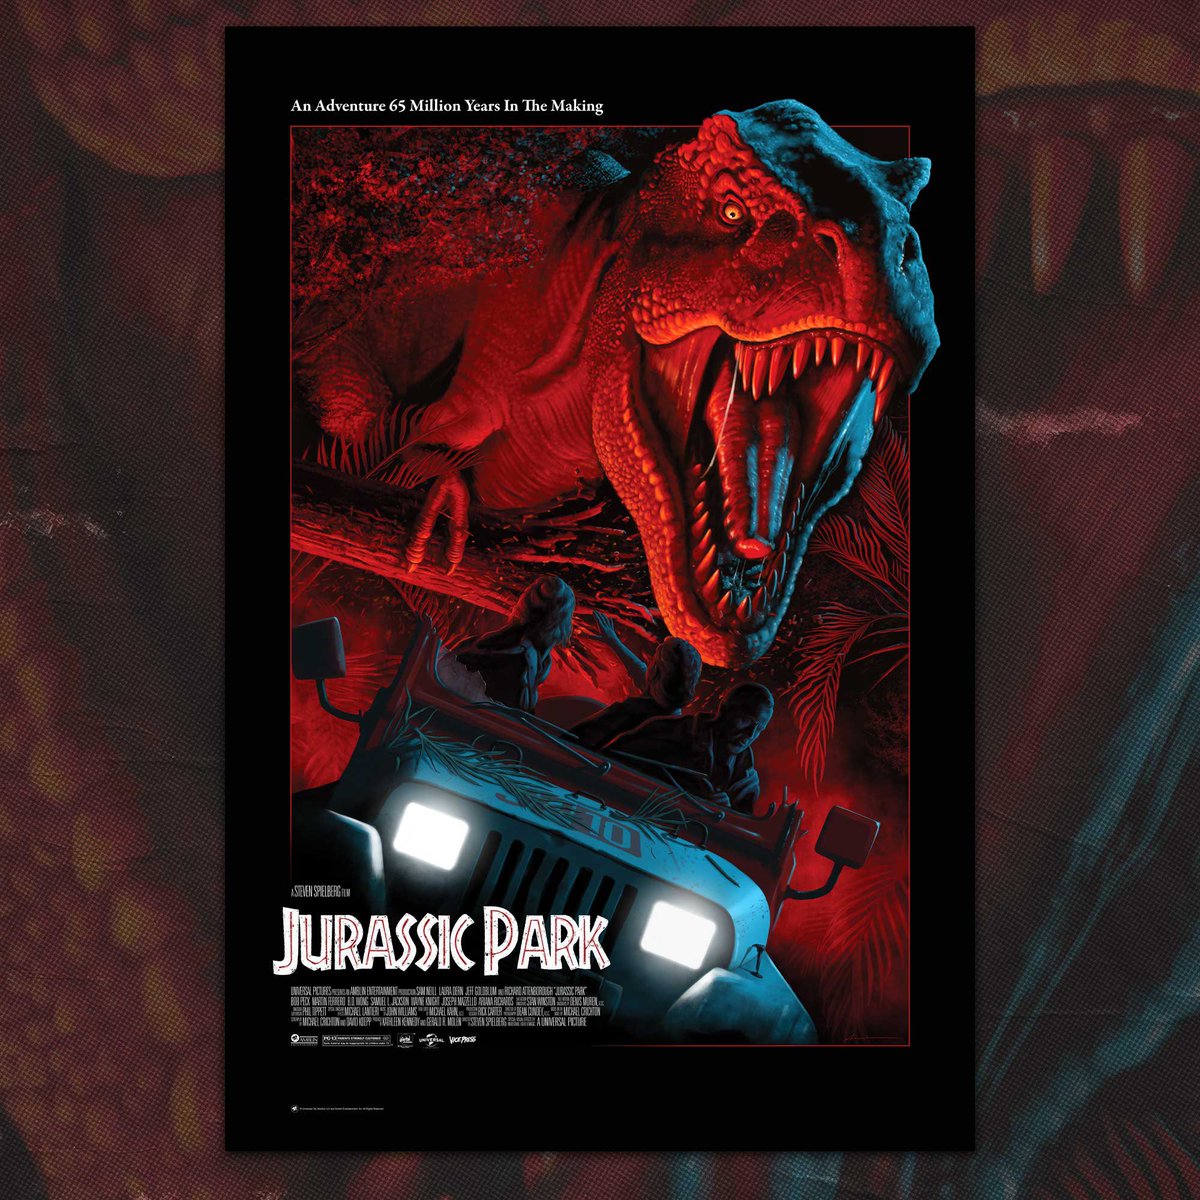 We still have a few more Open House announcements to come, but for now feast your eyes on Andrew Swainson’s Jurassic Park poster which will debut at the con on June 8th in Sheffield! For tickets and more info, head to vicepressopenhouse.co.uk #jurassicpark #poster #movieposter